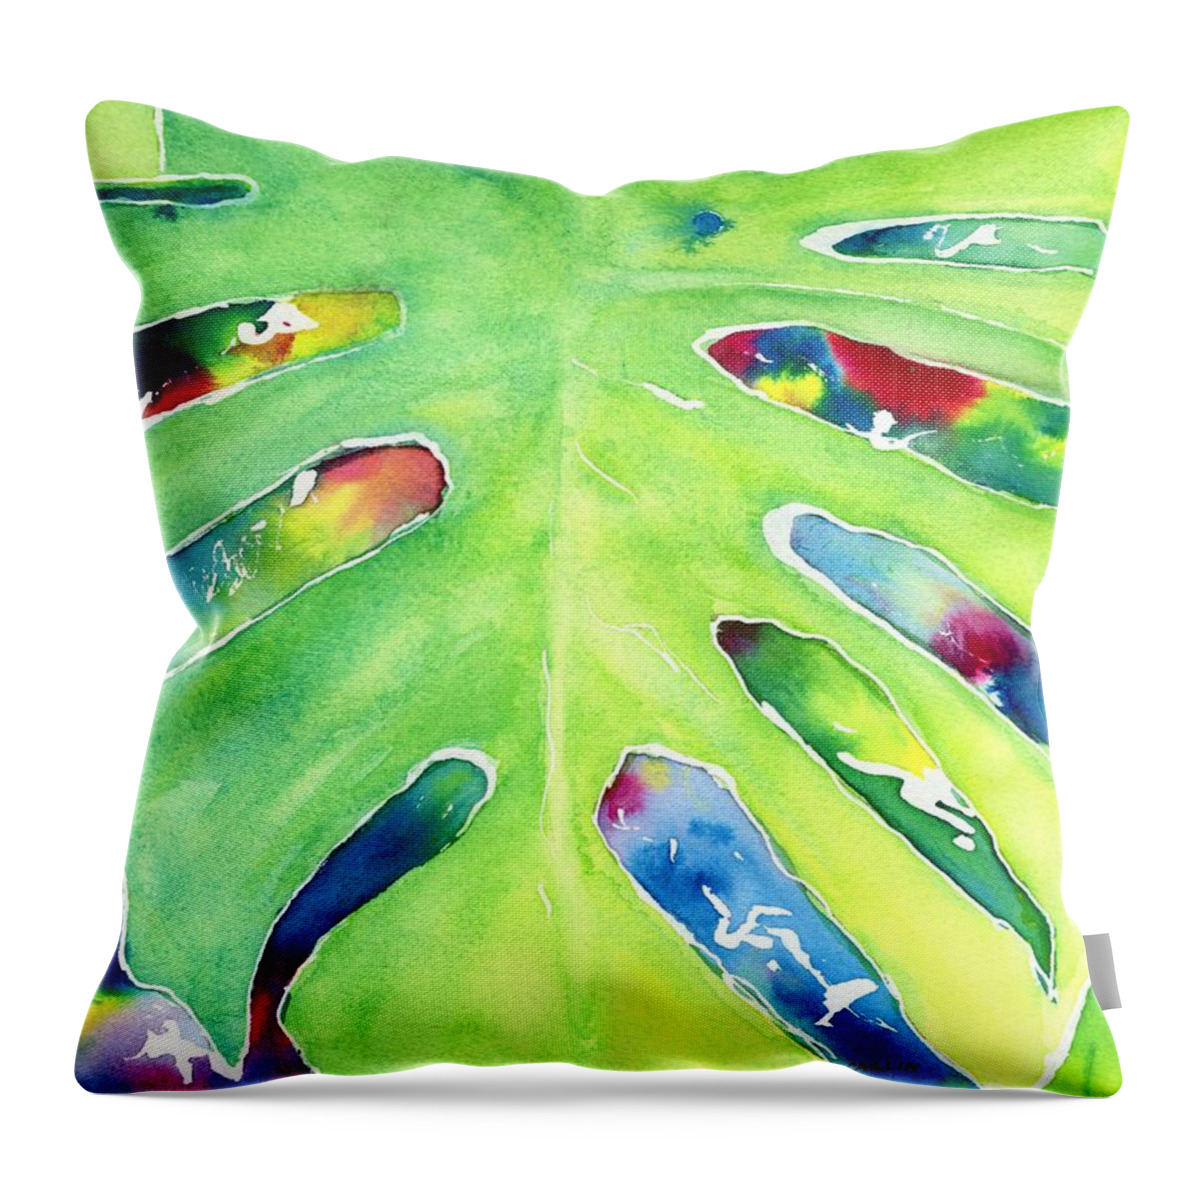 Monstera Throw Pillow featuring the painting Monstera Tropical Leaves 2 by Carlin Blahnik CarlinArtWatercolor